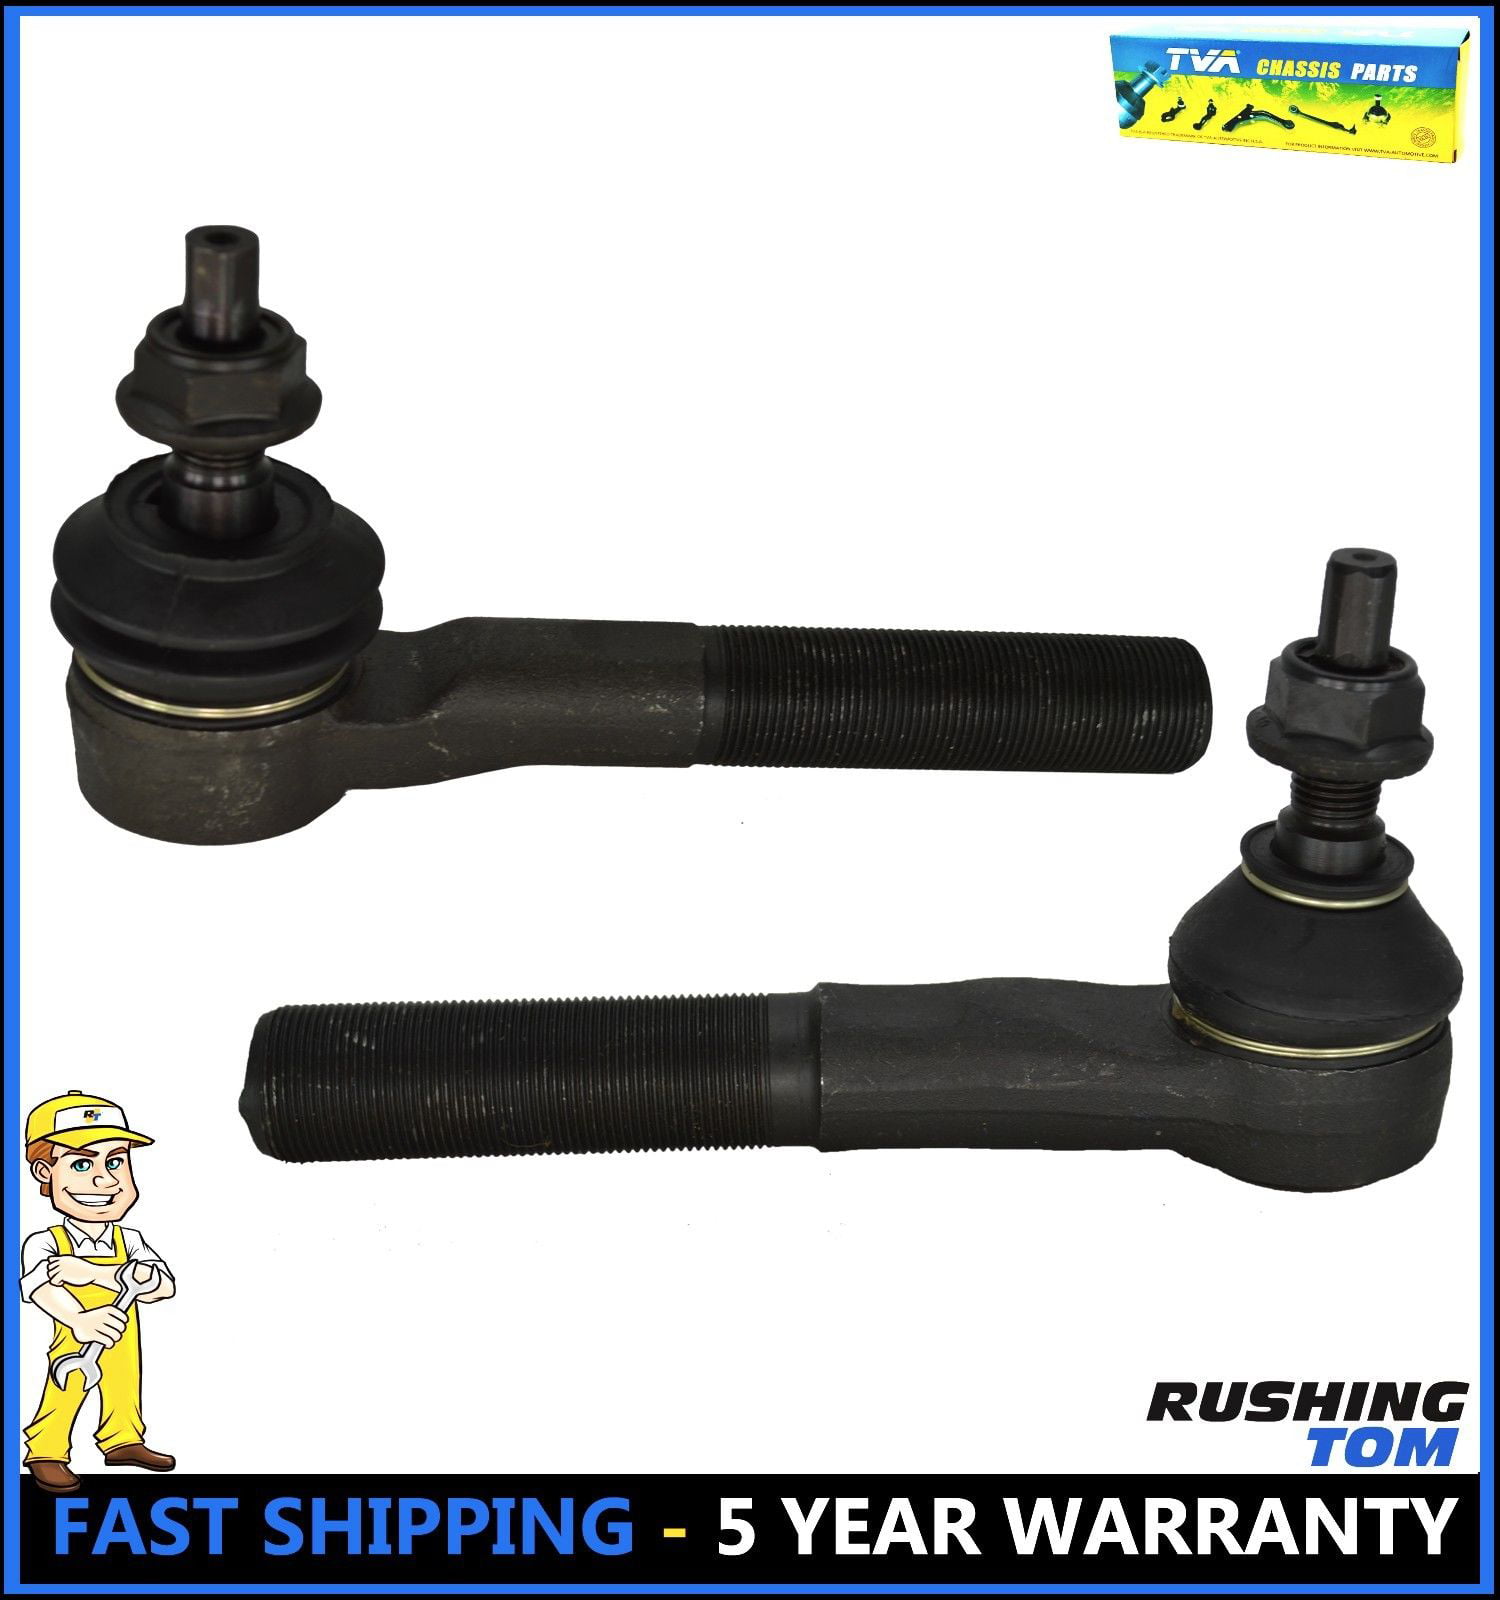 2 Pc Steering Kit for Dodge Ram 1500/2500/3500 Ram 2500/3500 Outer Tie Rod Ends